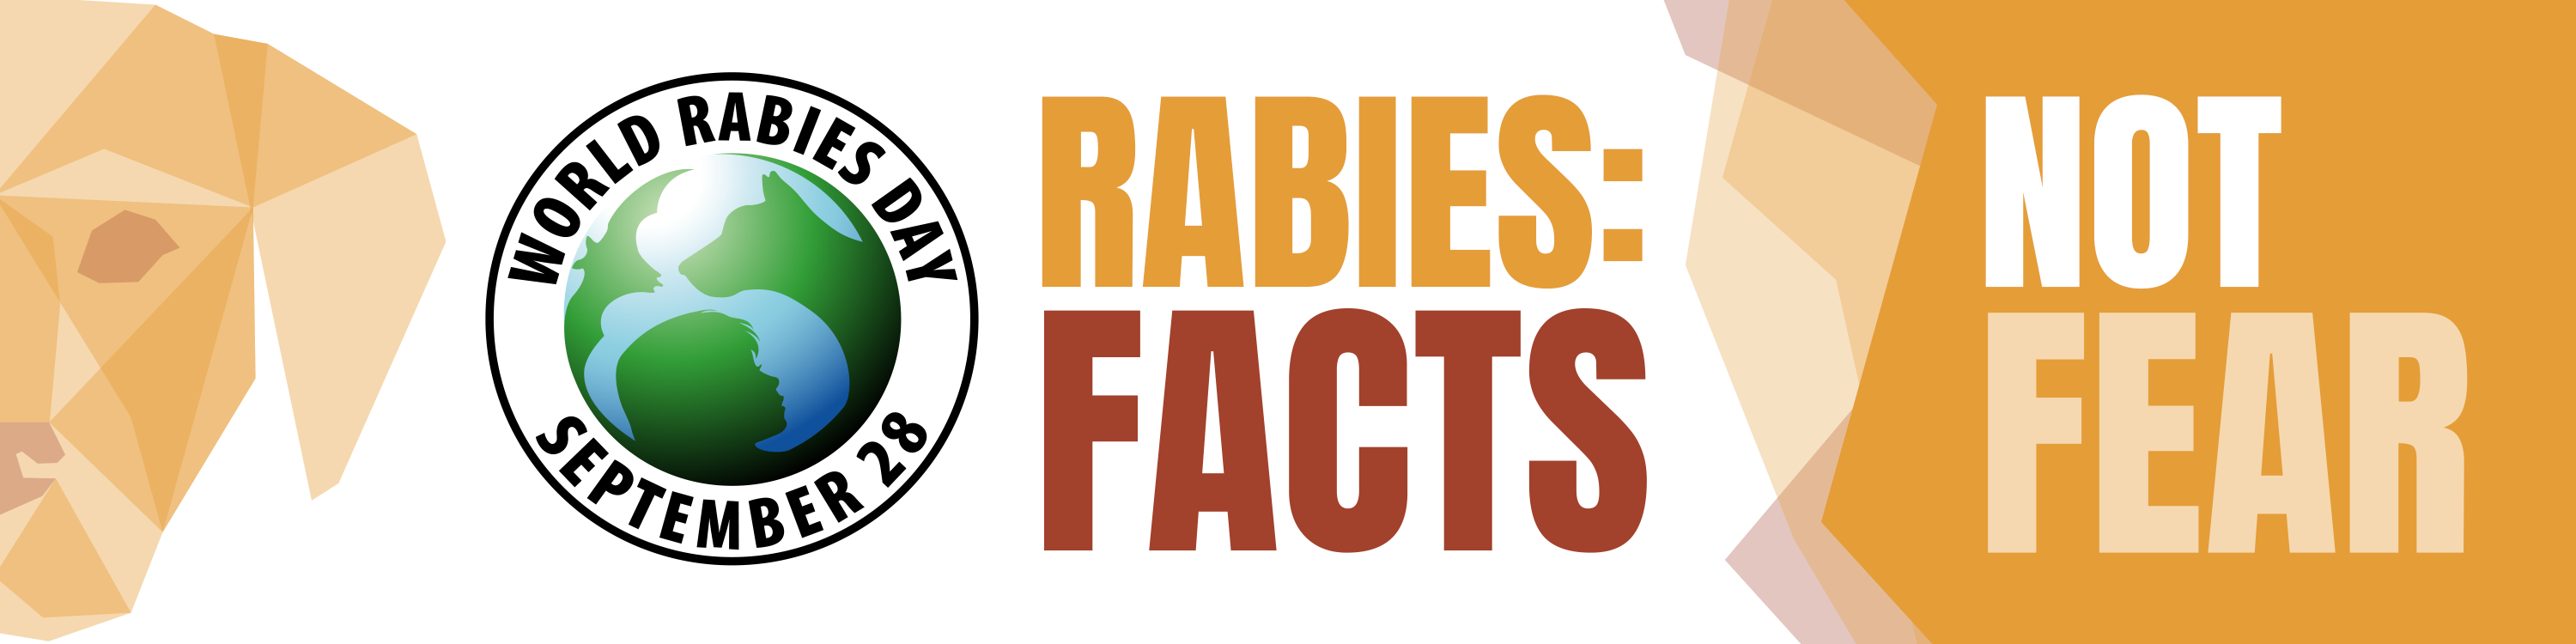 World Rabies Day 2021 | Global Alliance for Rabies Control